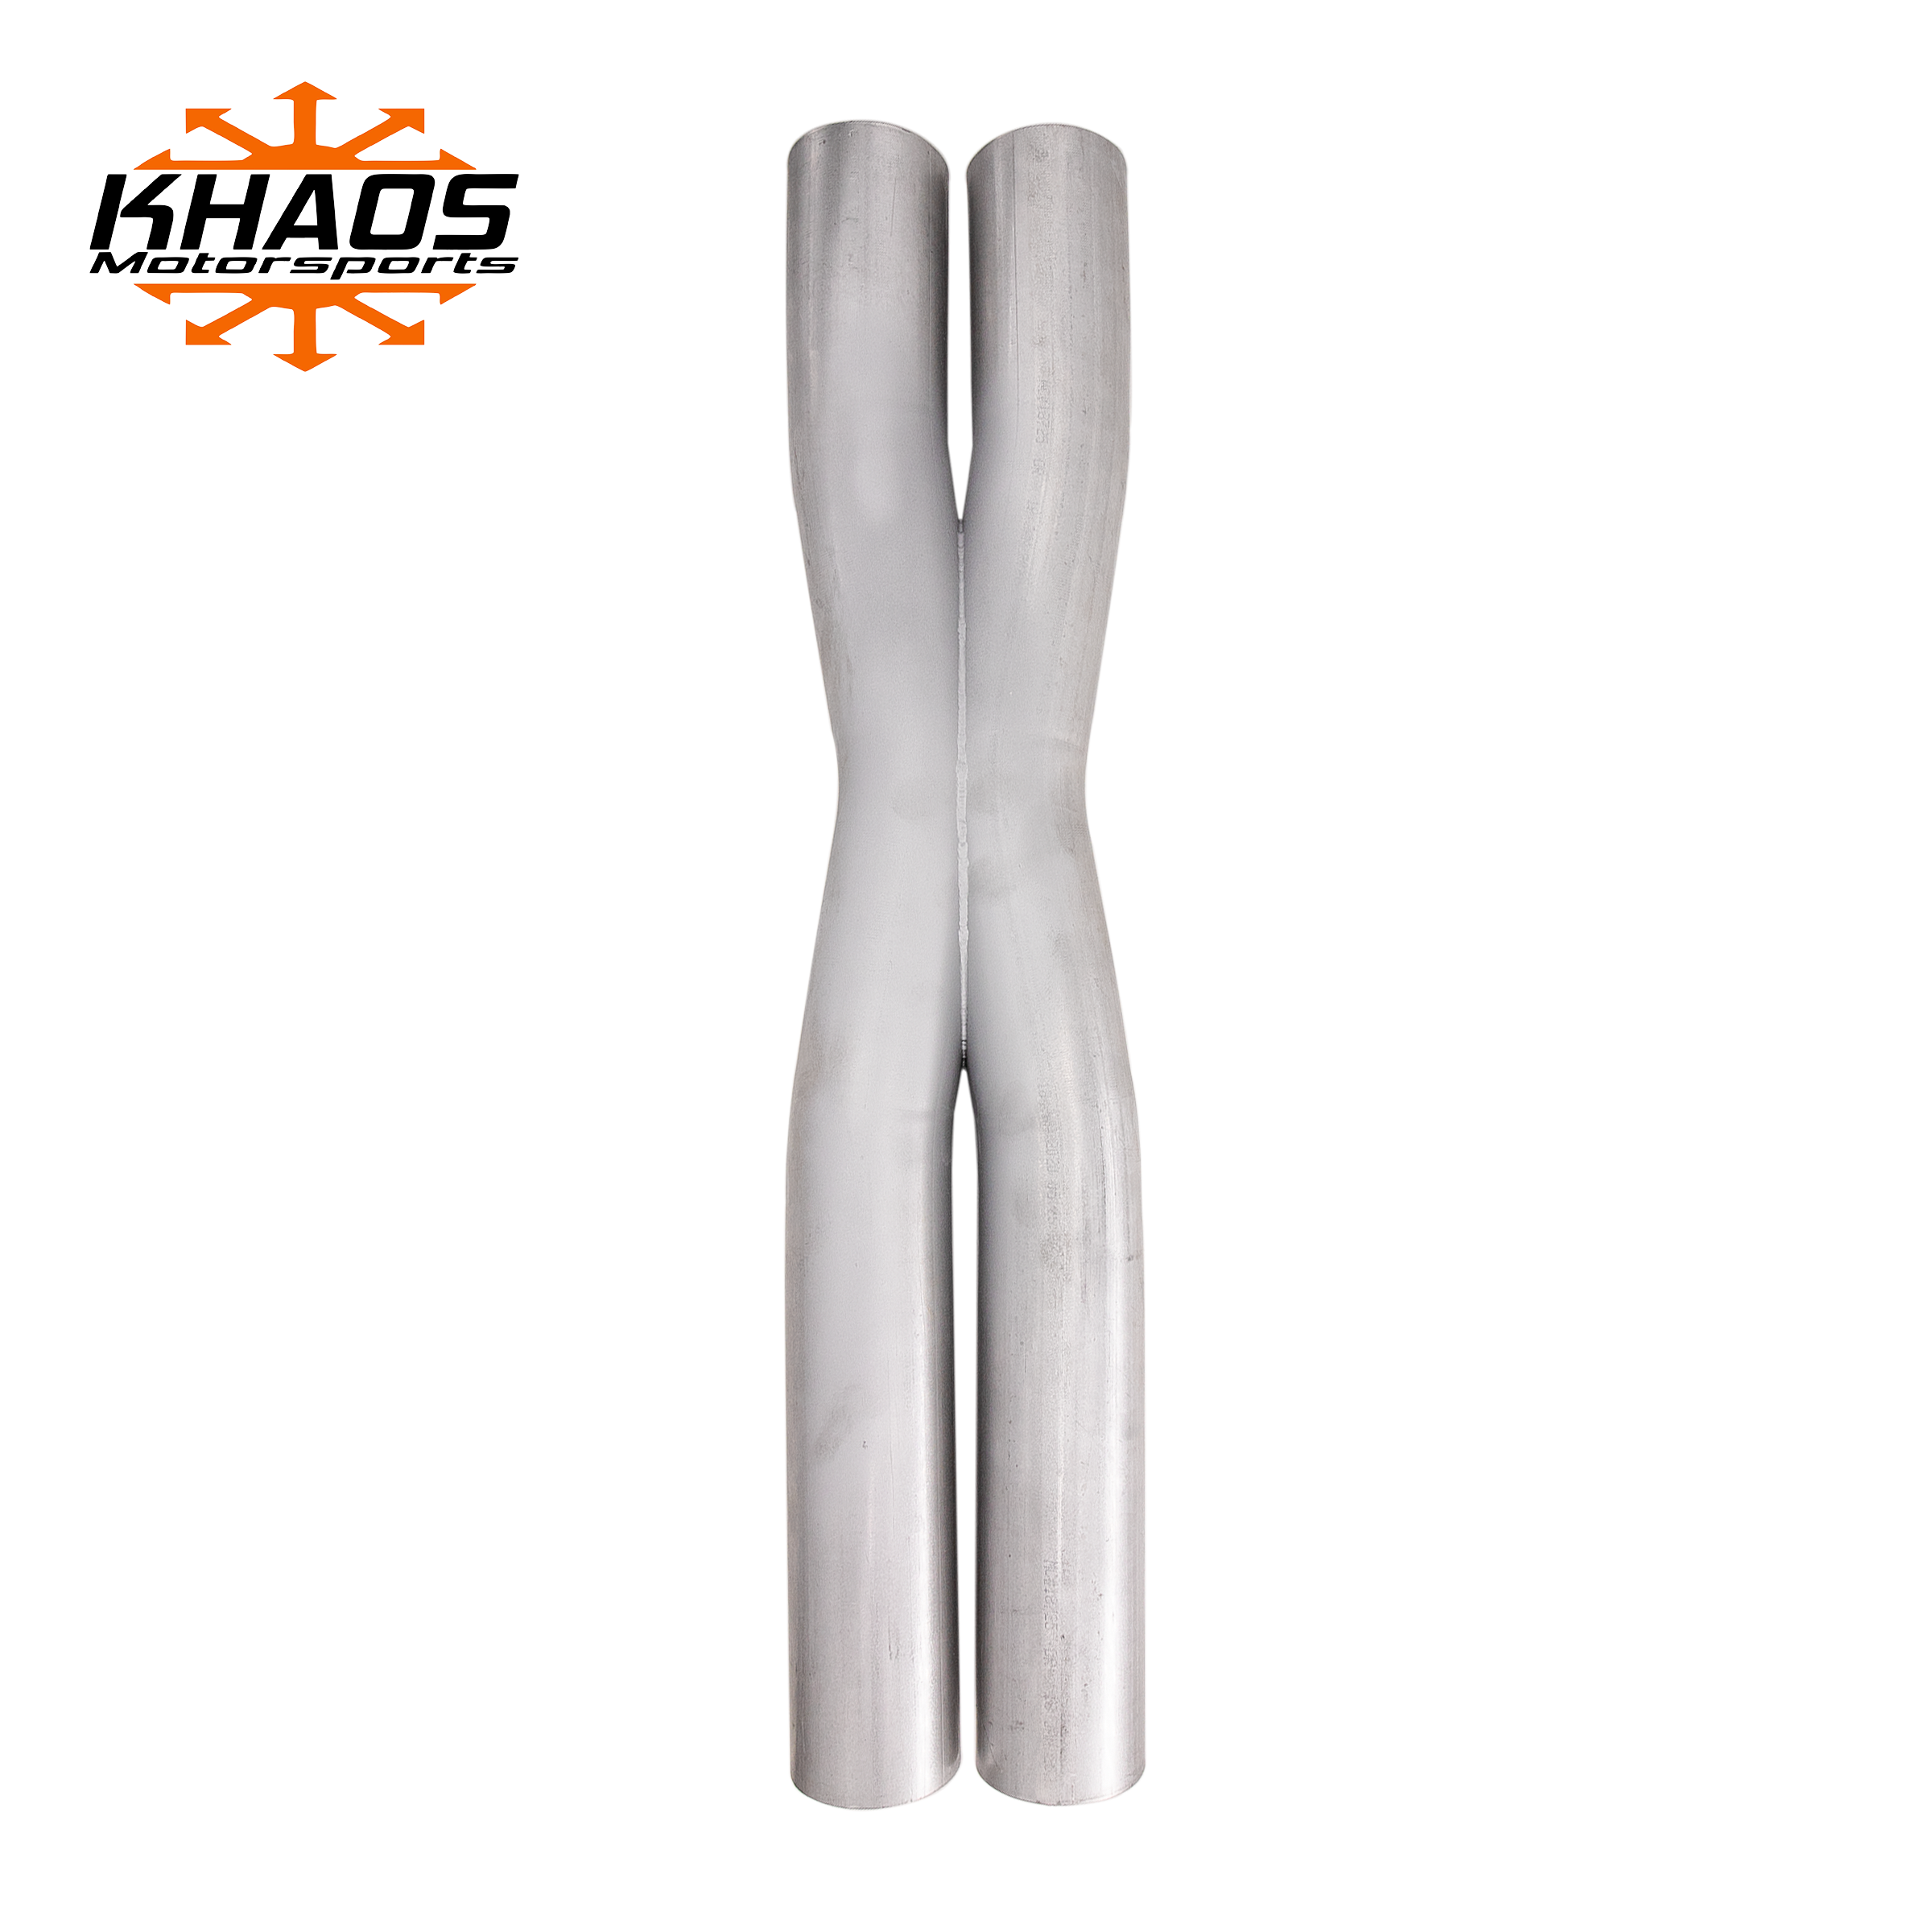 Dodge Charger And Challenger 3 Aluminized Steel Mandrel Bent Crossove Khaos Motorsports